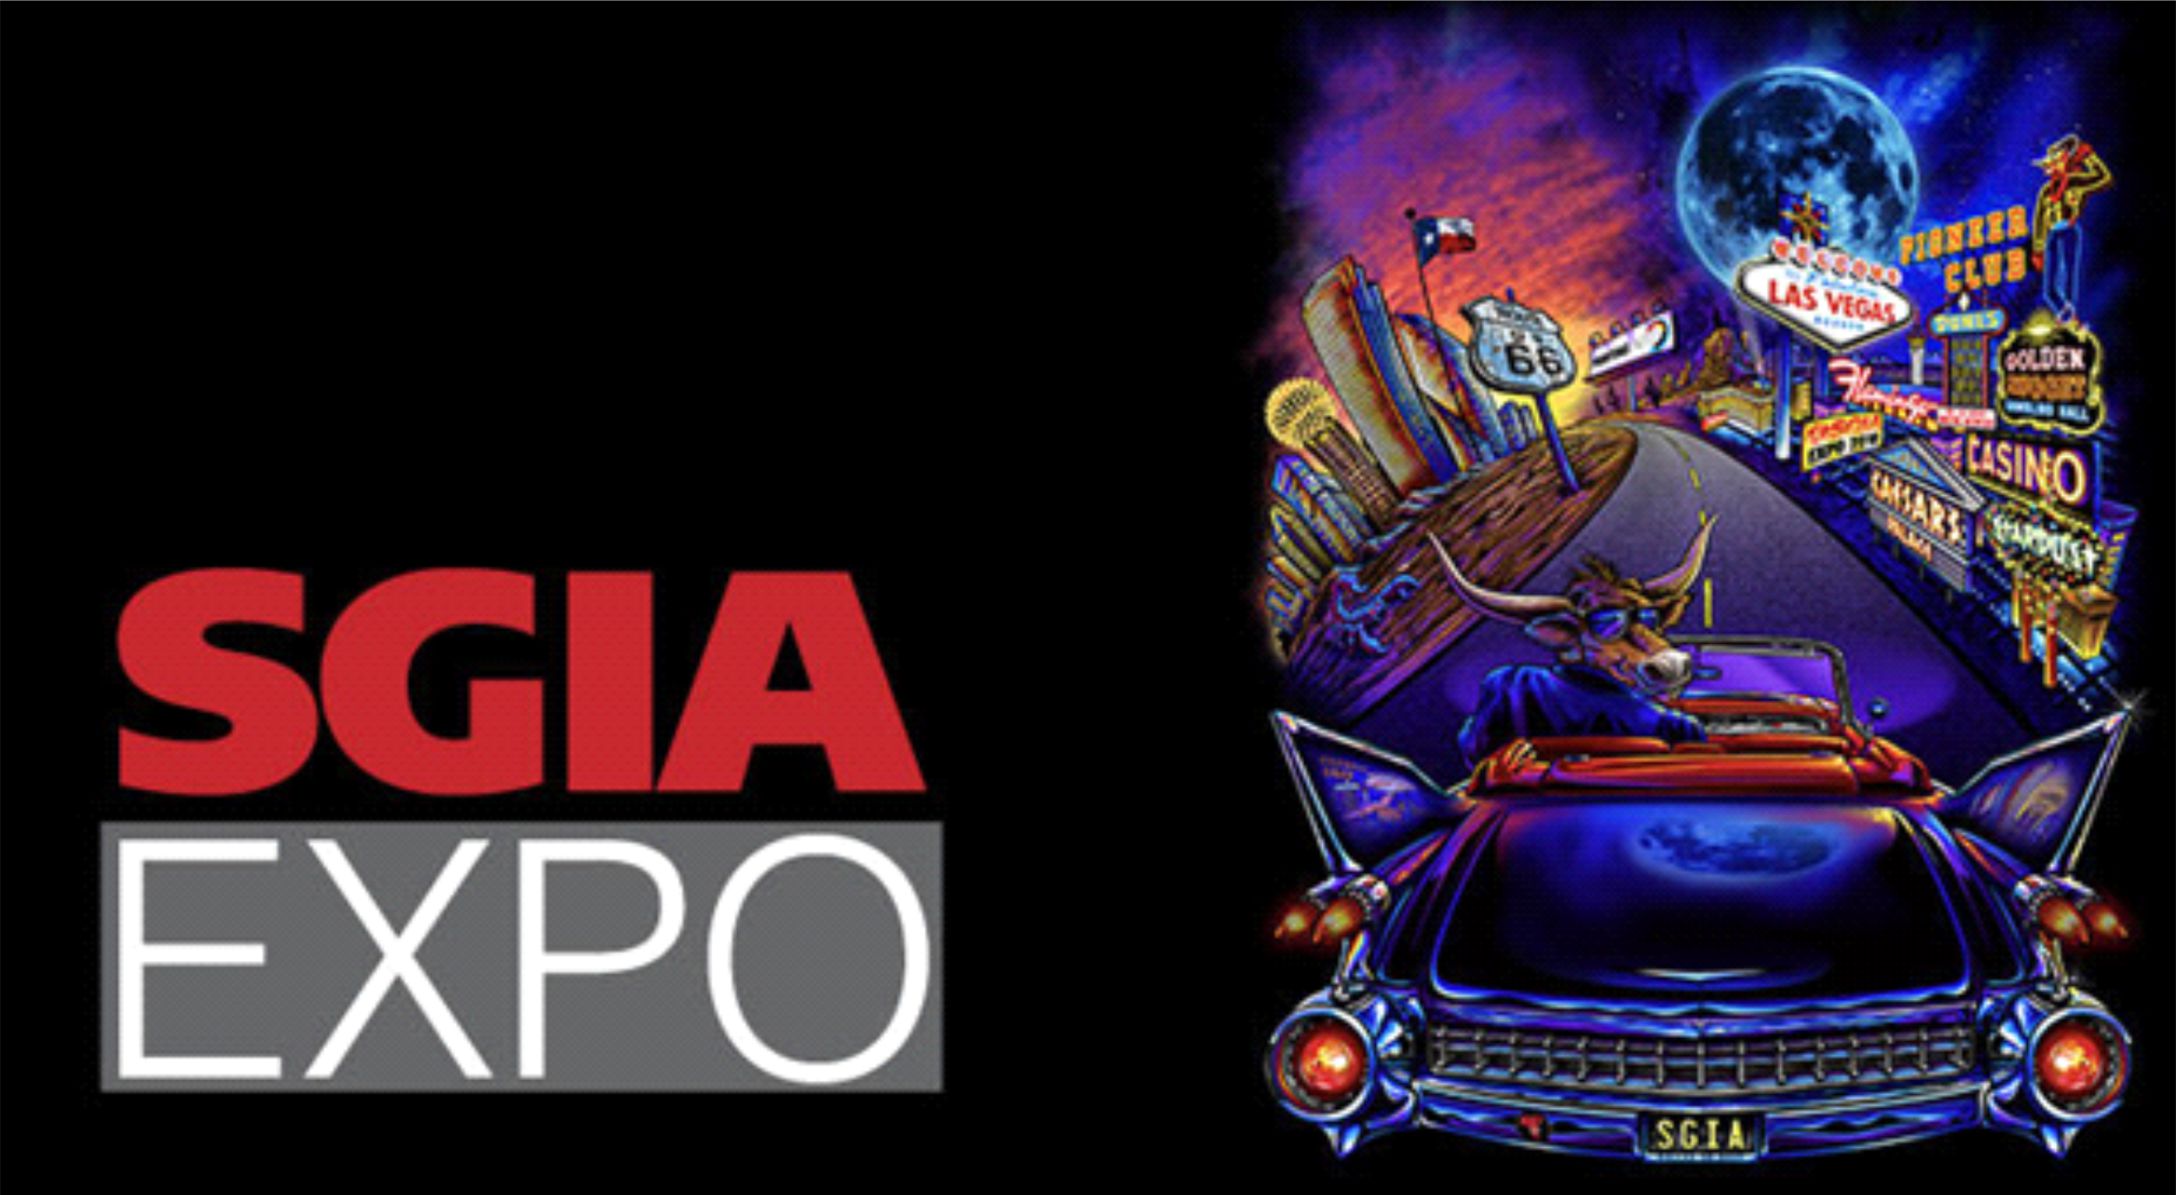 A REVIEW OF THE SGIA EXPO 2018